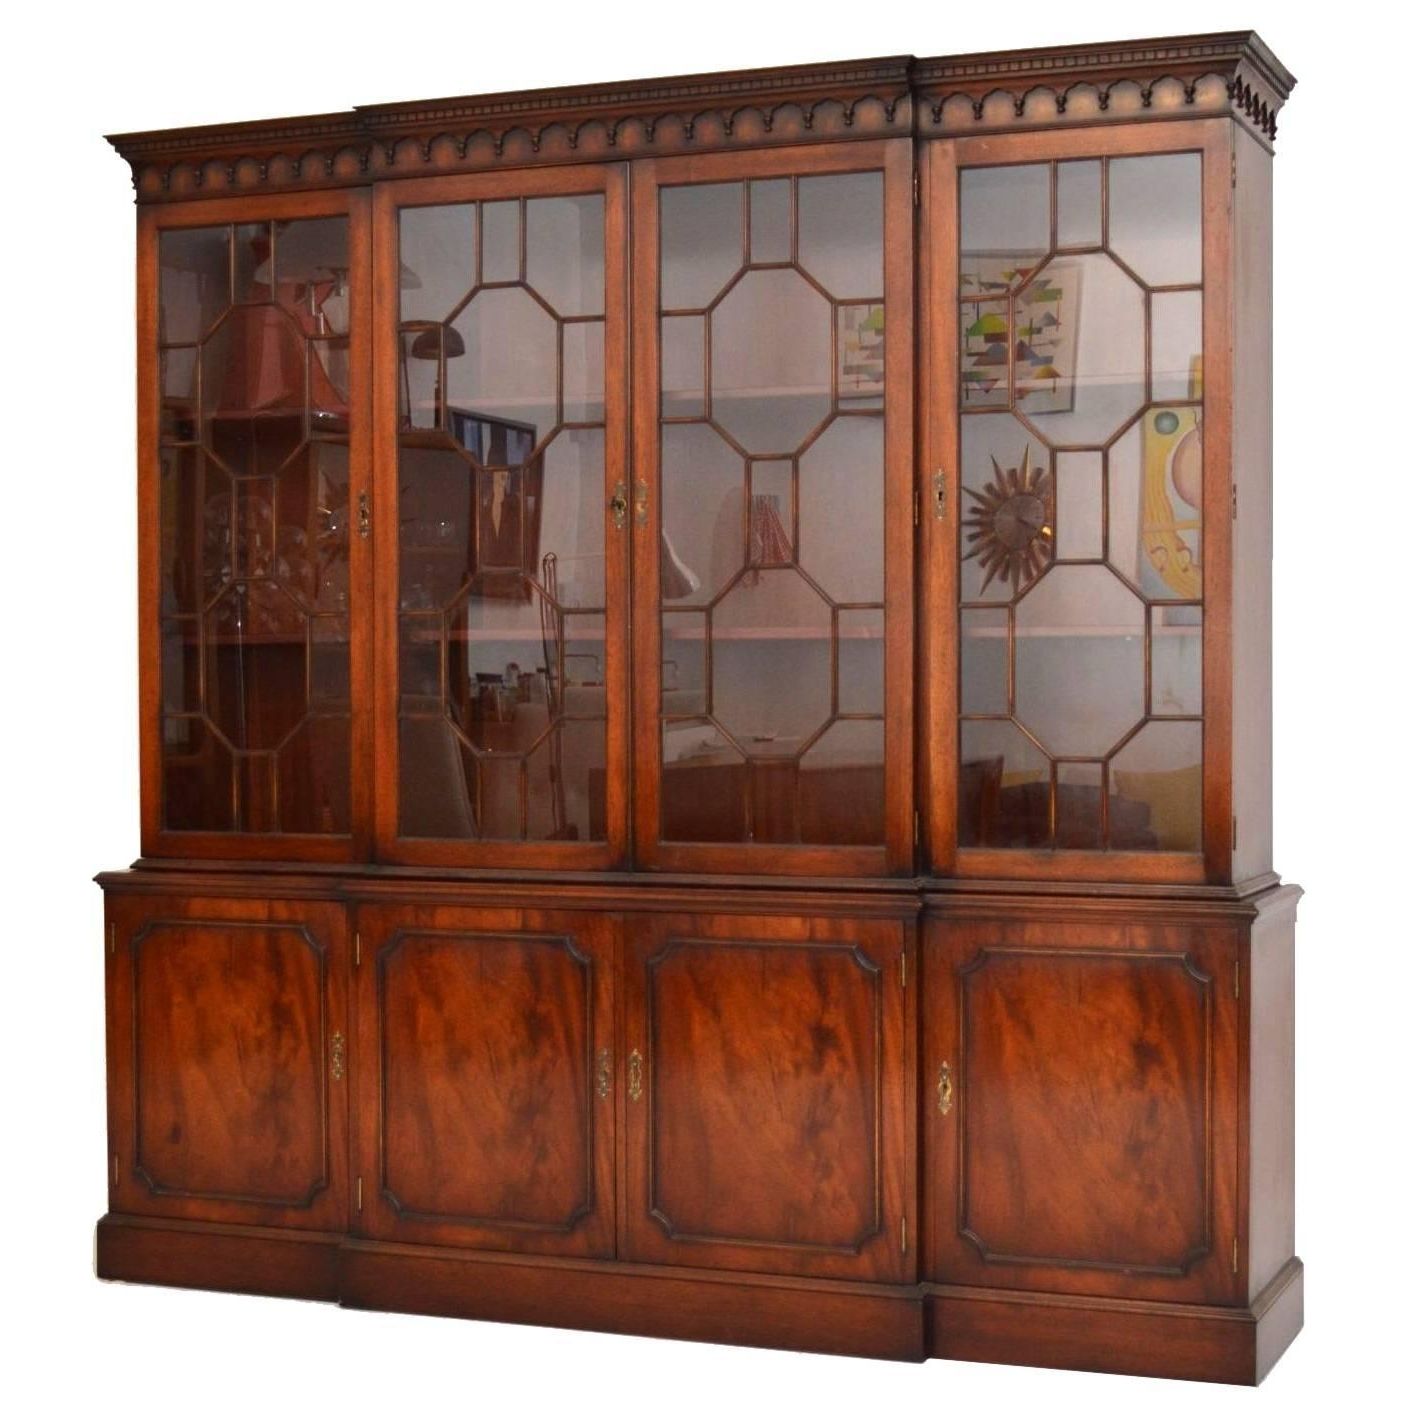 Trendy Breakfront Bookcases Within Antique Georgian Style Mahogany Breakfront Bookcase At 1stdibs (View 1 of 15)